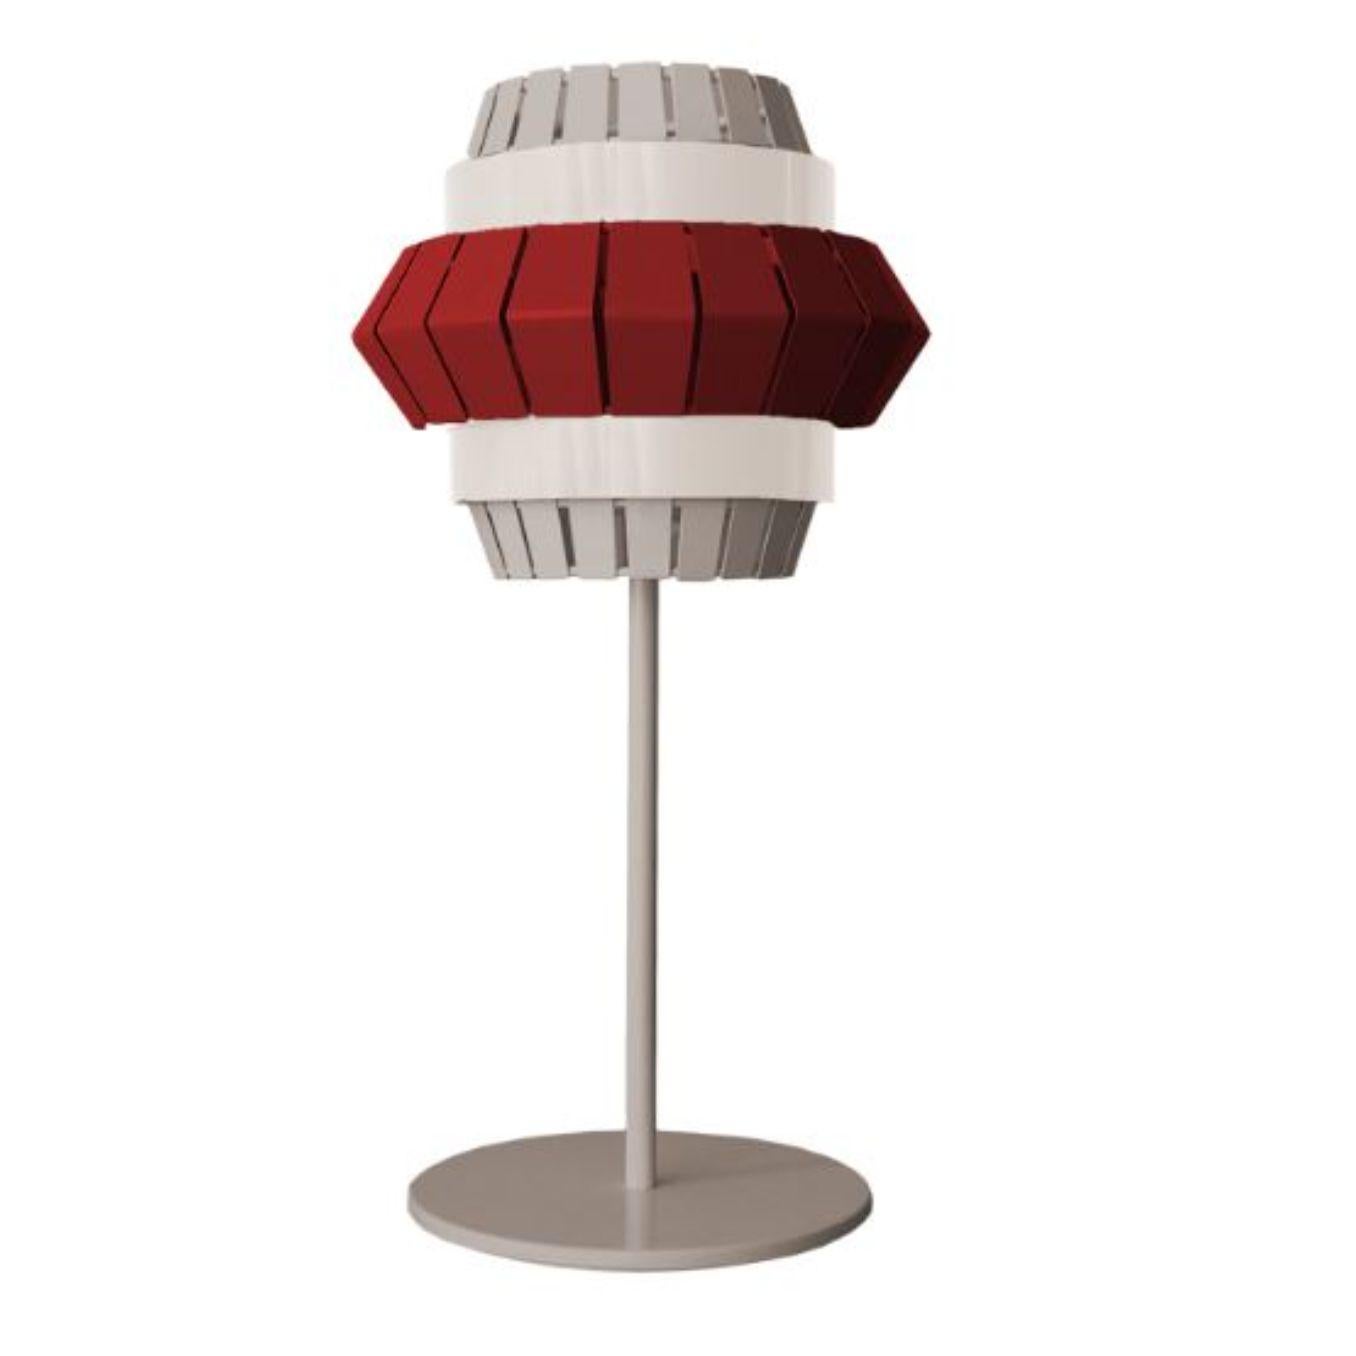 Ivory and lipstick comb table lamp by Dooq
Dimensions: W 25.5 x D 25.5 x H 60 cm
Materials: lacquered metal.
Also available in different colors and materials.

Information:
230V/50Hz
E14/1x20W LED
120V/60Hz
E12/1x15W LED
bulb not included



Dooq is